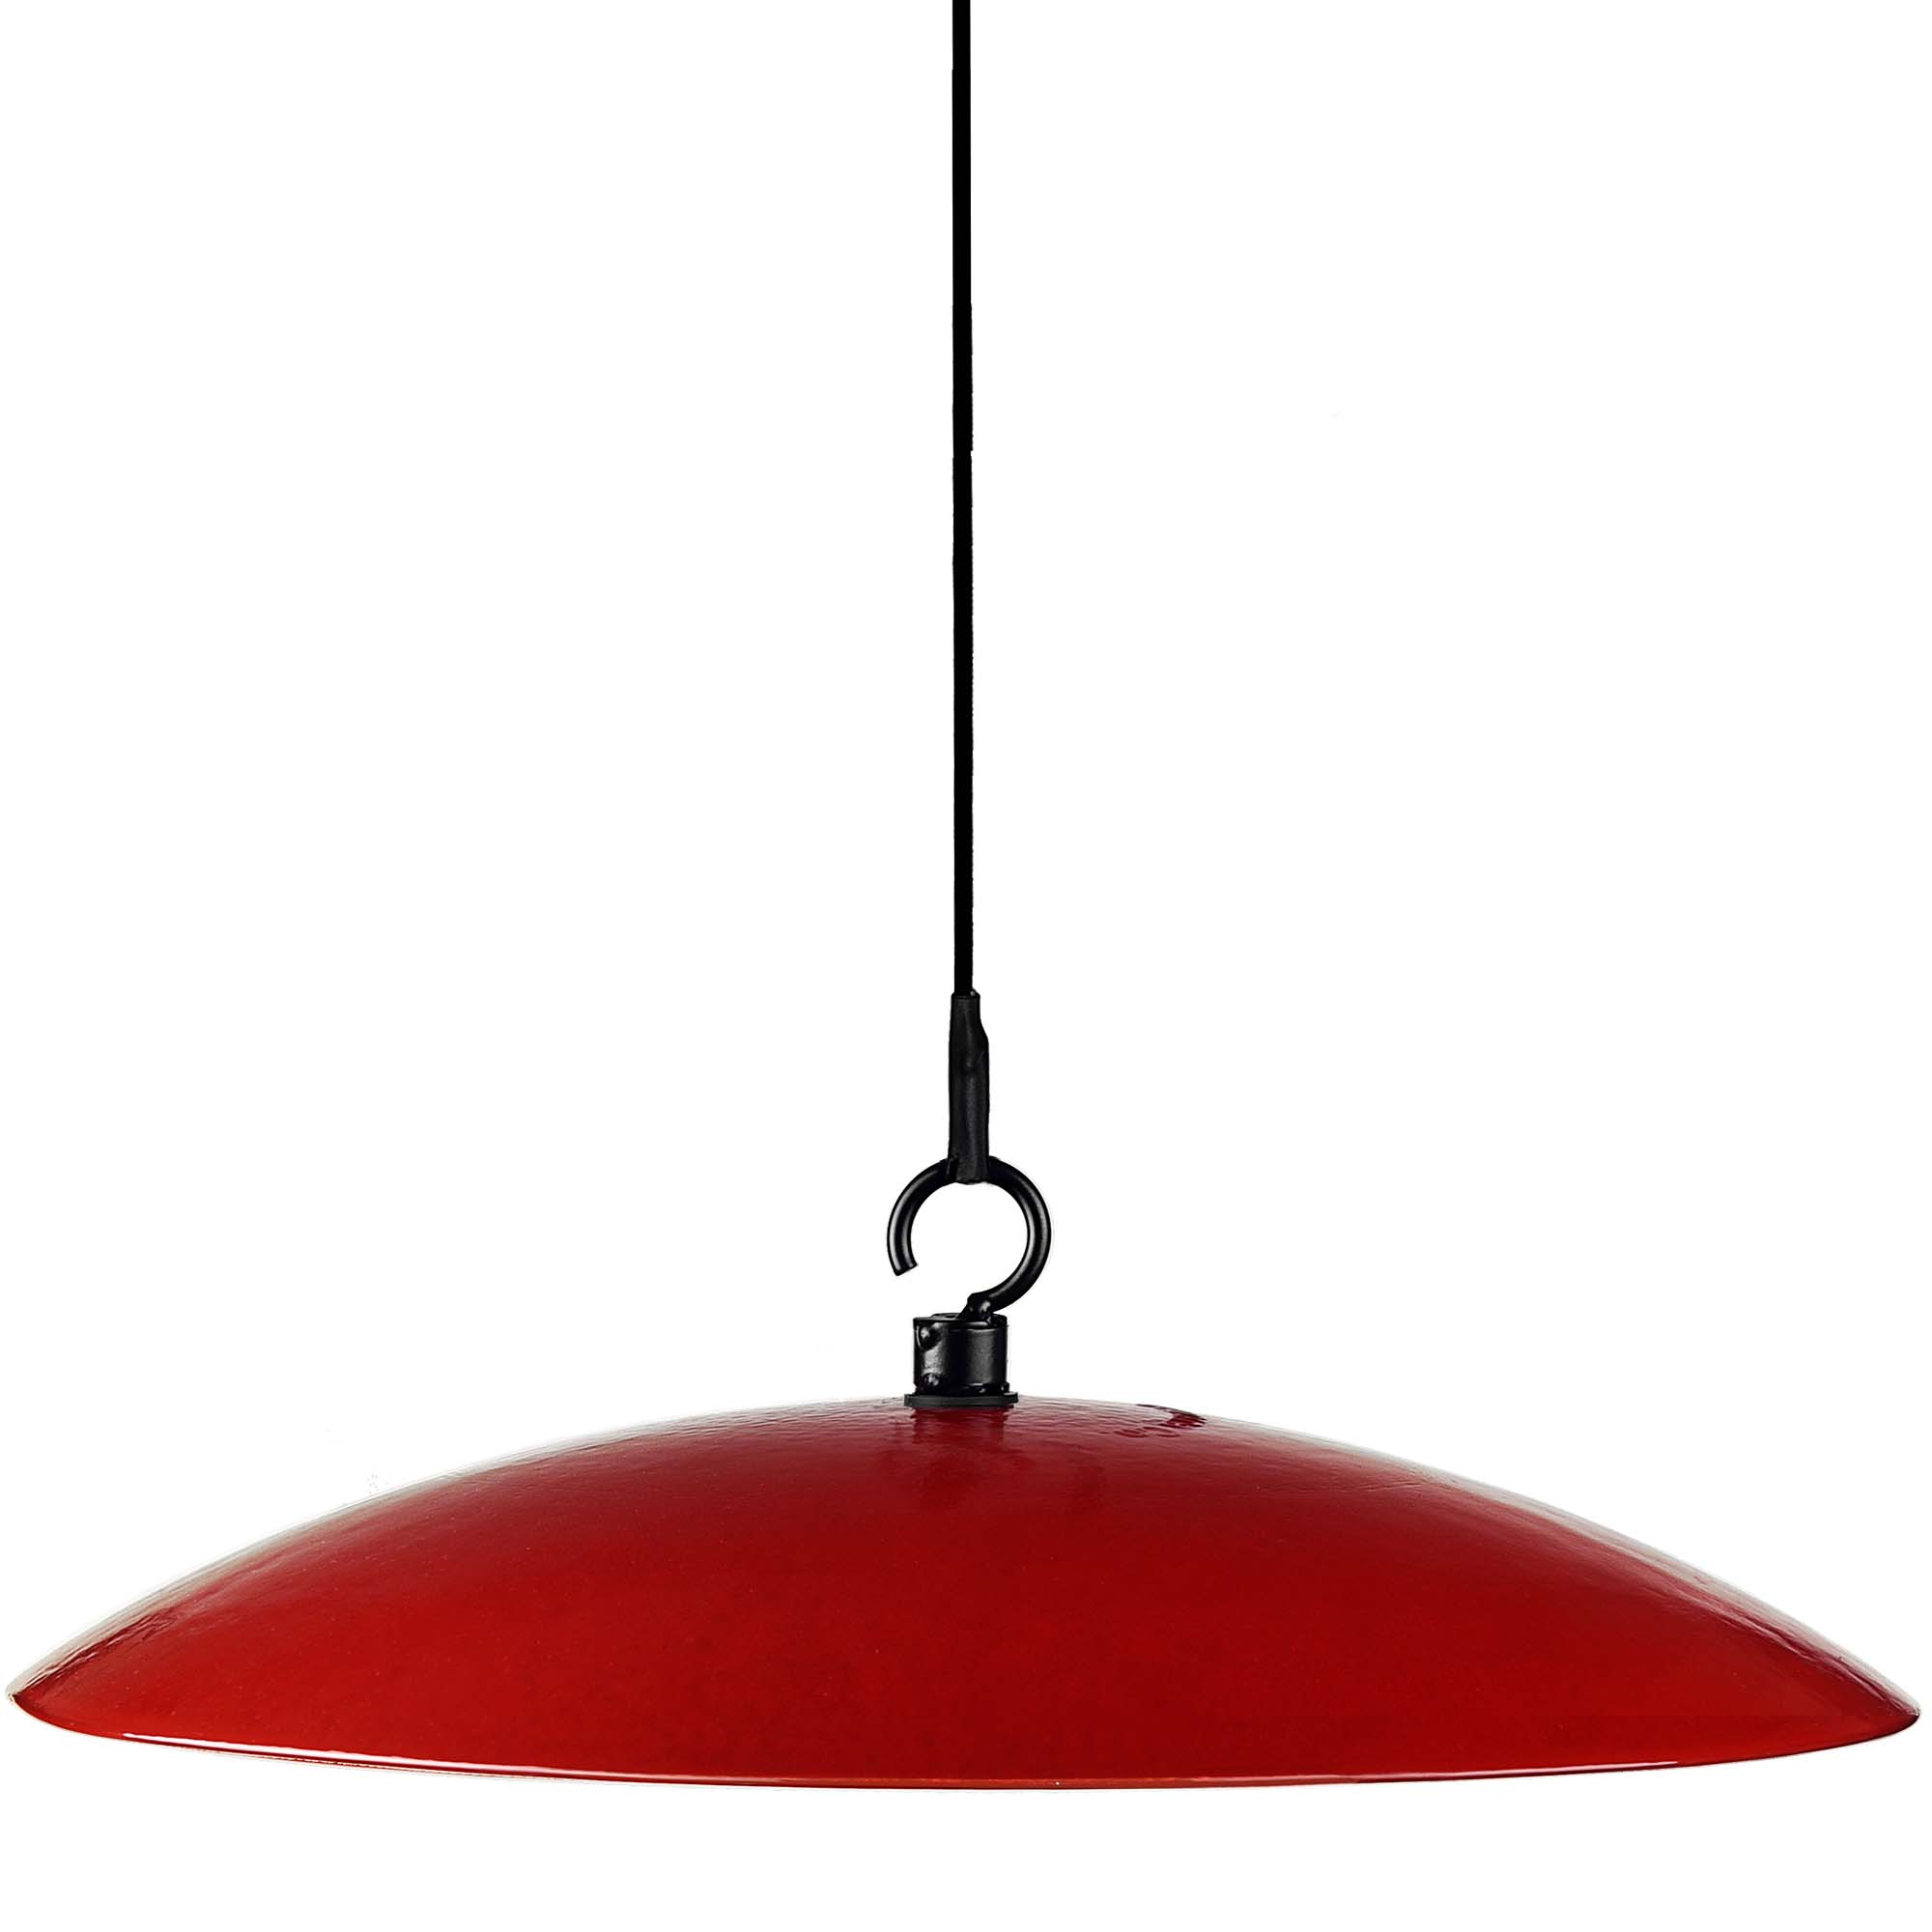 Mosaic Birds Glass Baffle Dome Solid Ruby Red